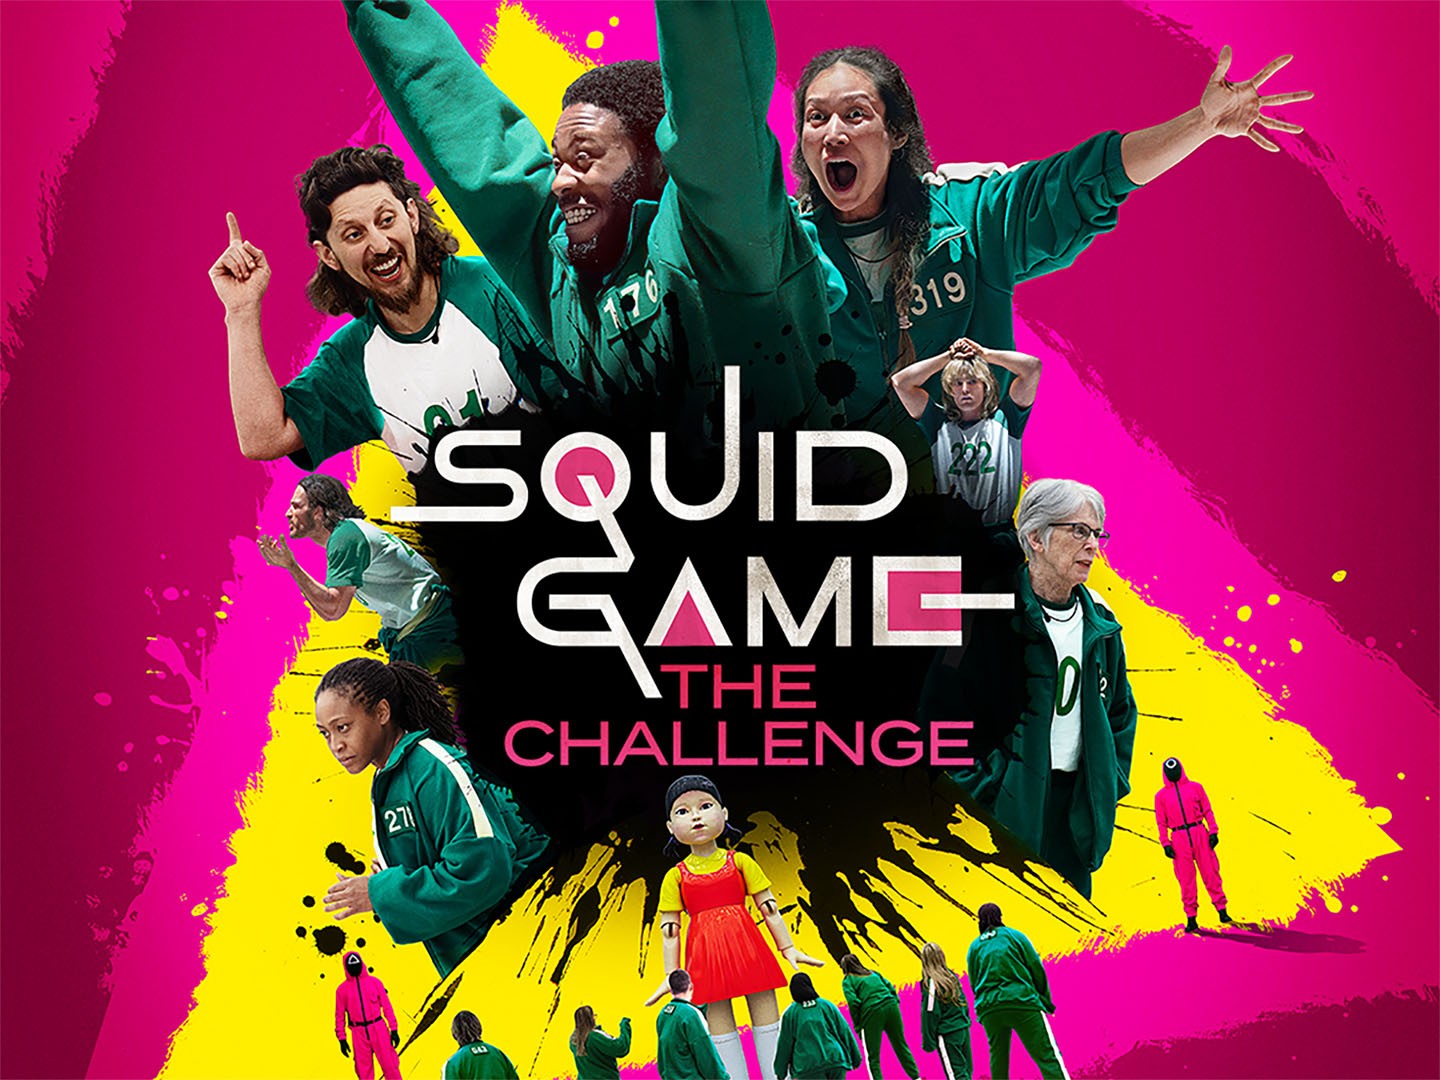 Squid Game: The Challenge Review: Netflix's Squid Game Reality